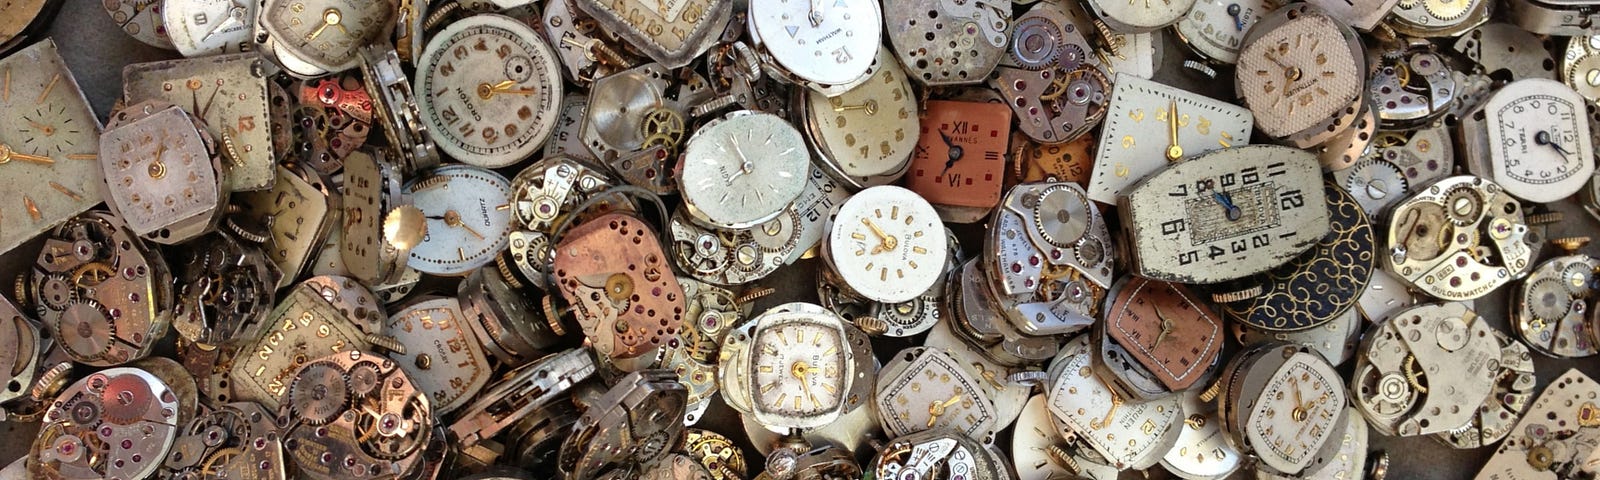 Photograph of pile of antique wrist watches.